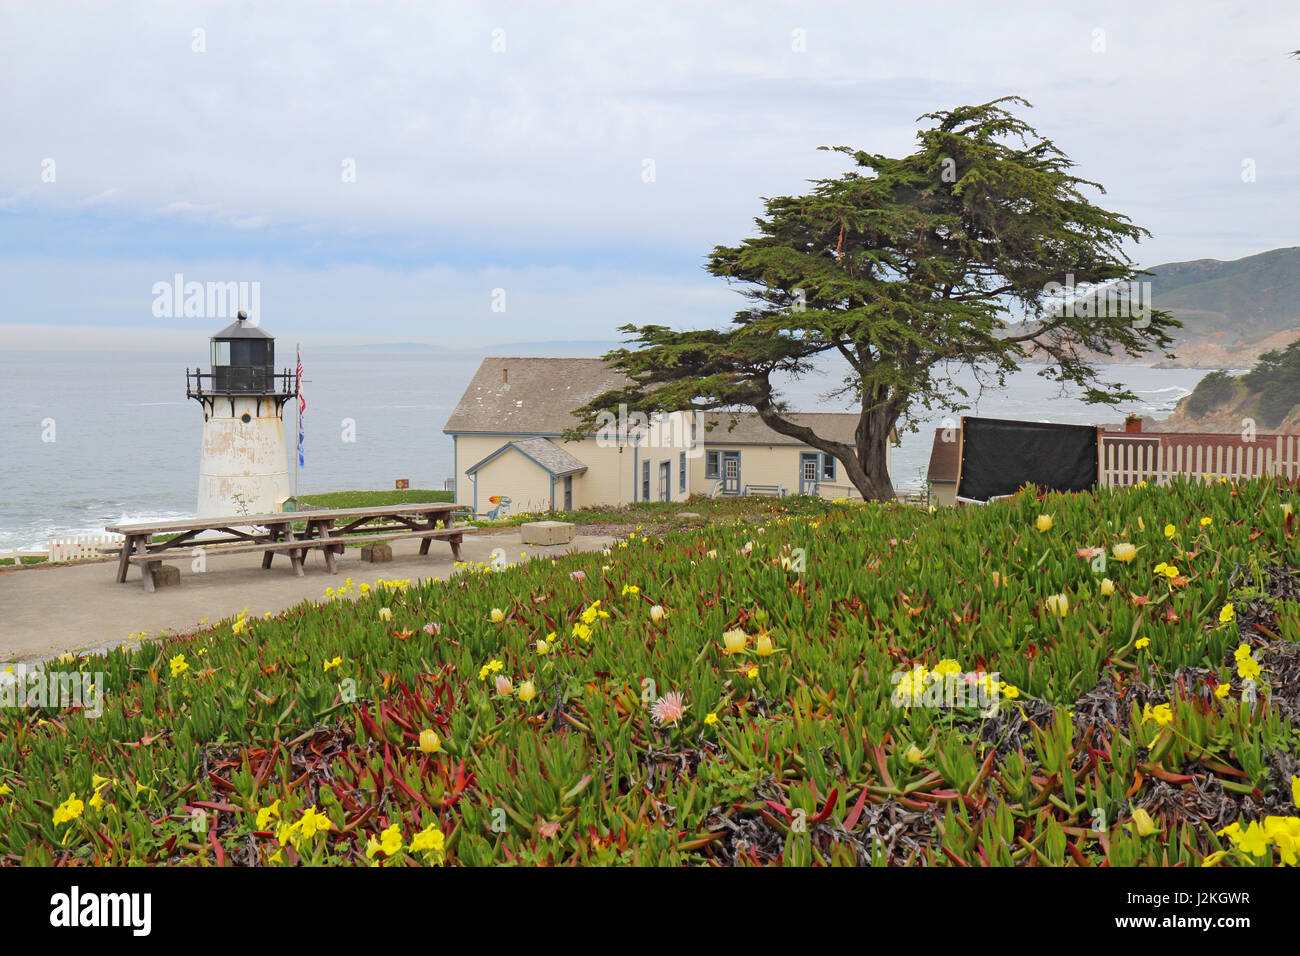 The Point Montara Fog Signal and Light Station off of California Highway 1 approximately 25 miles south of San Francisco on a foggy day Stock Photo